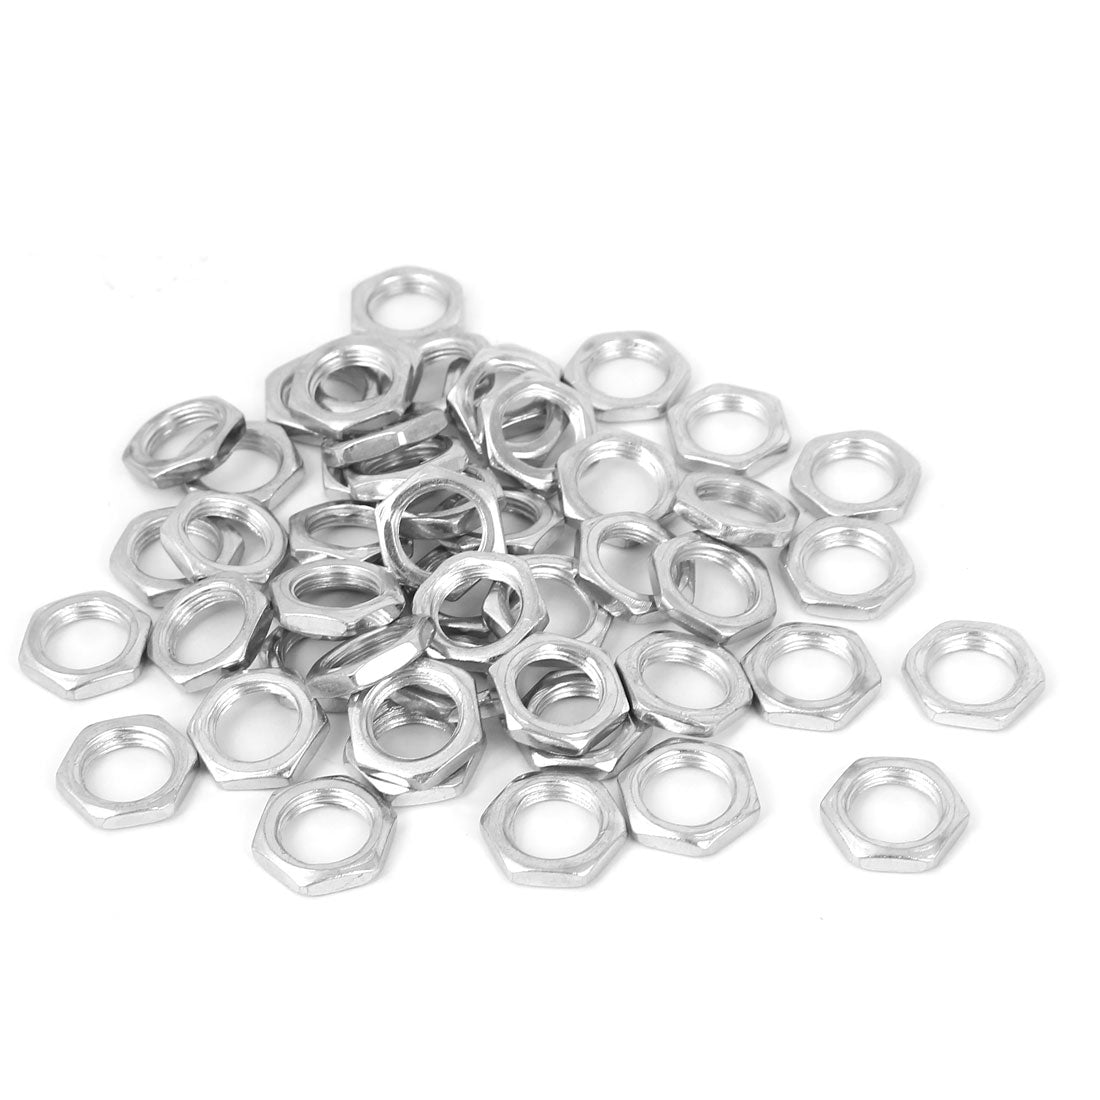 uxcell Uxcell M10x0.75x3mm Zinc Plated Hex Nuts Fastener 50pcs for Screws Bolts